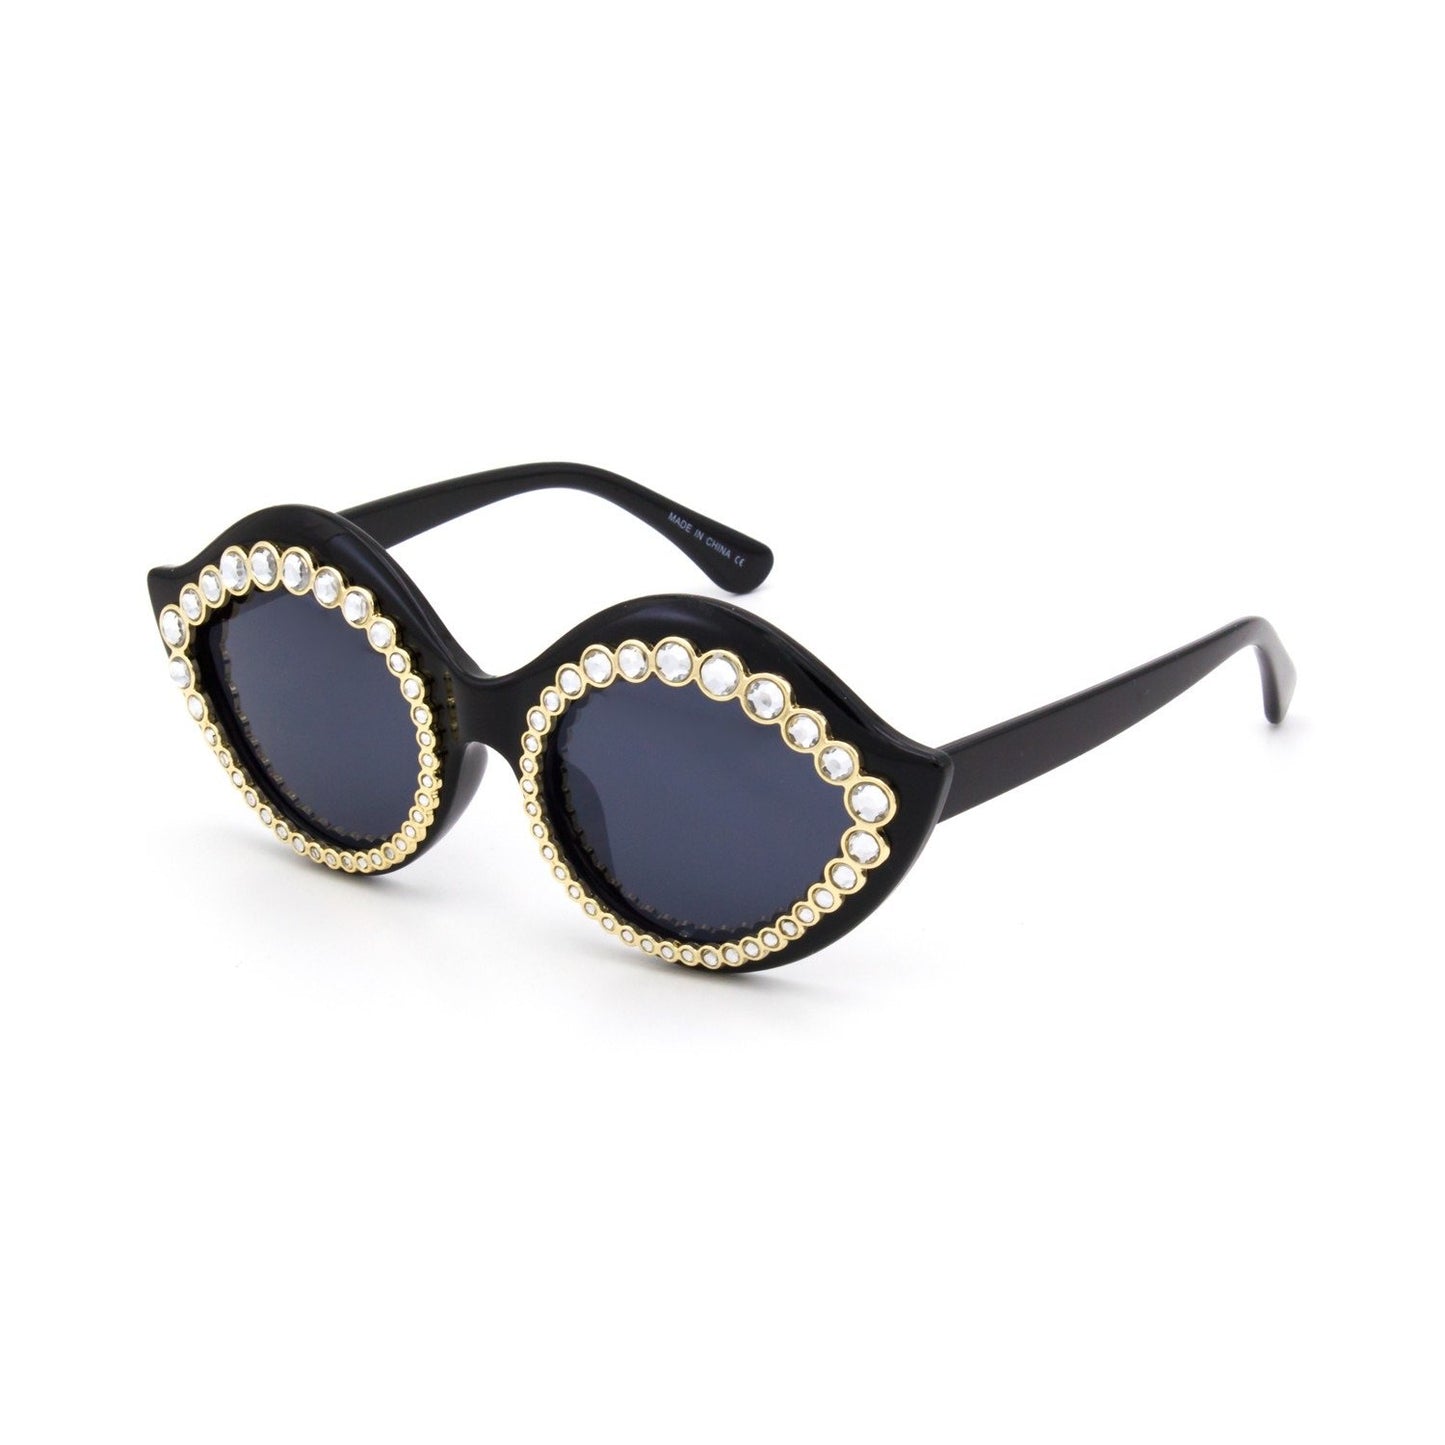 “Your Problem” No Shade Cat Eye - Weekend Shade Sunglasses